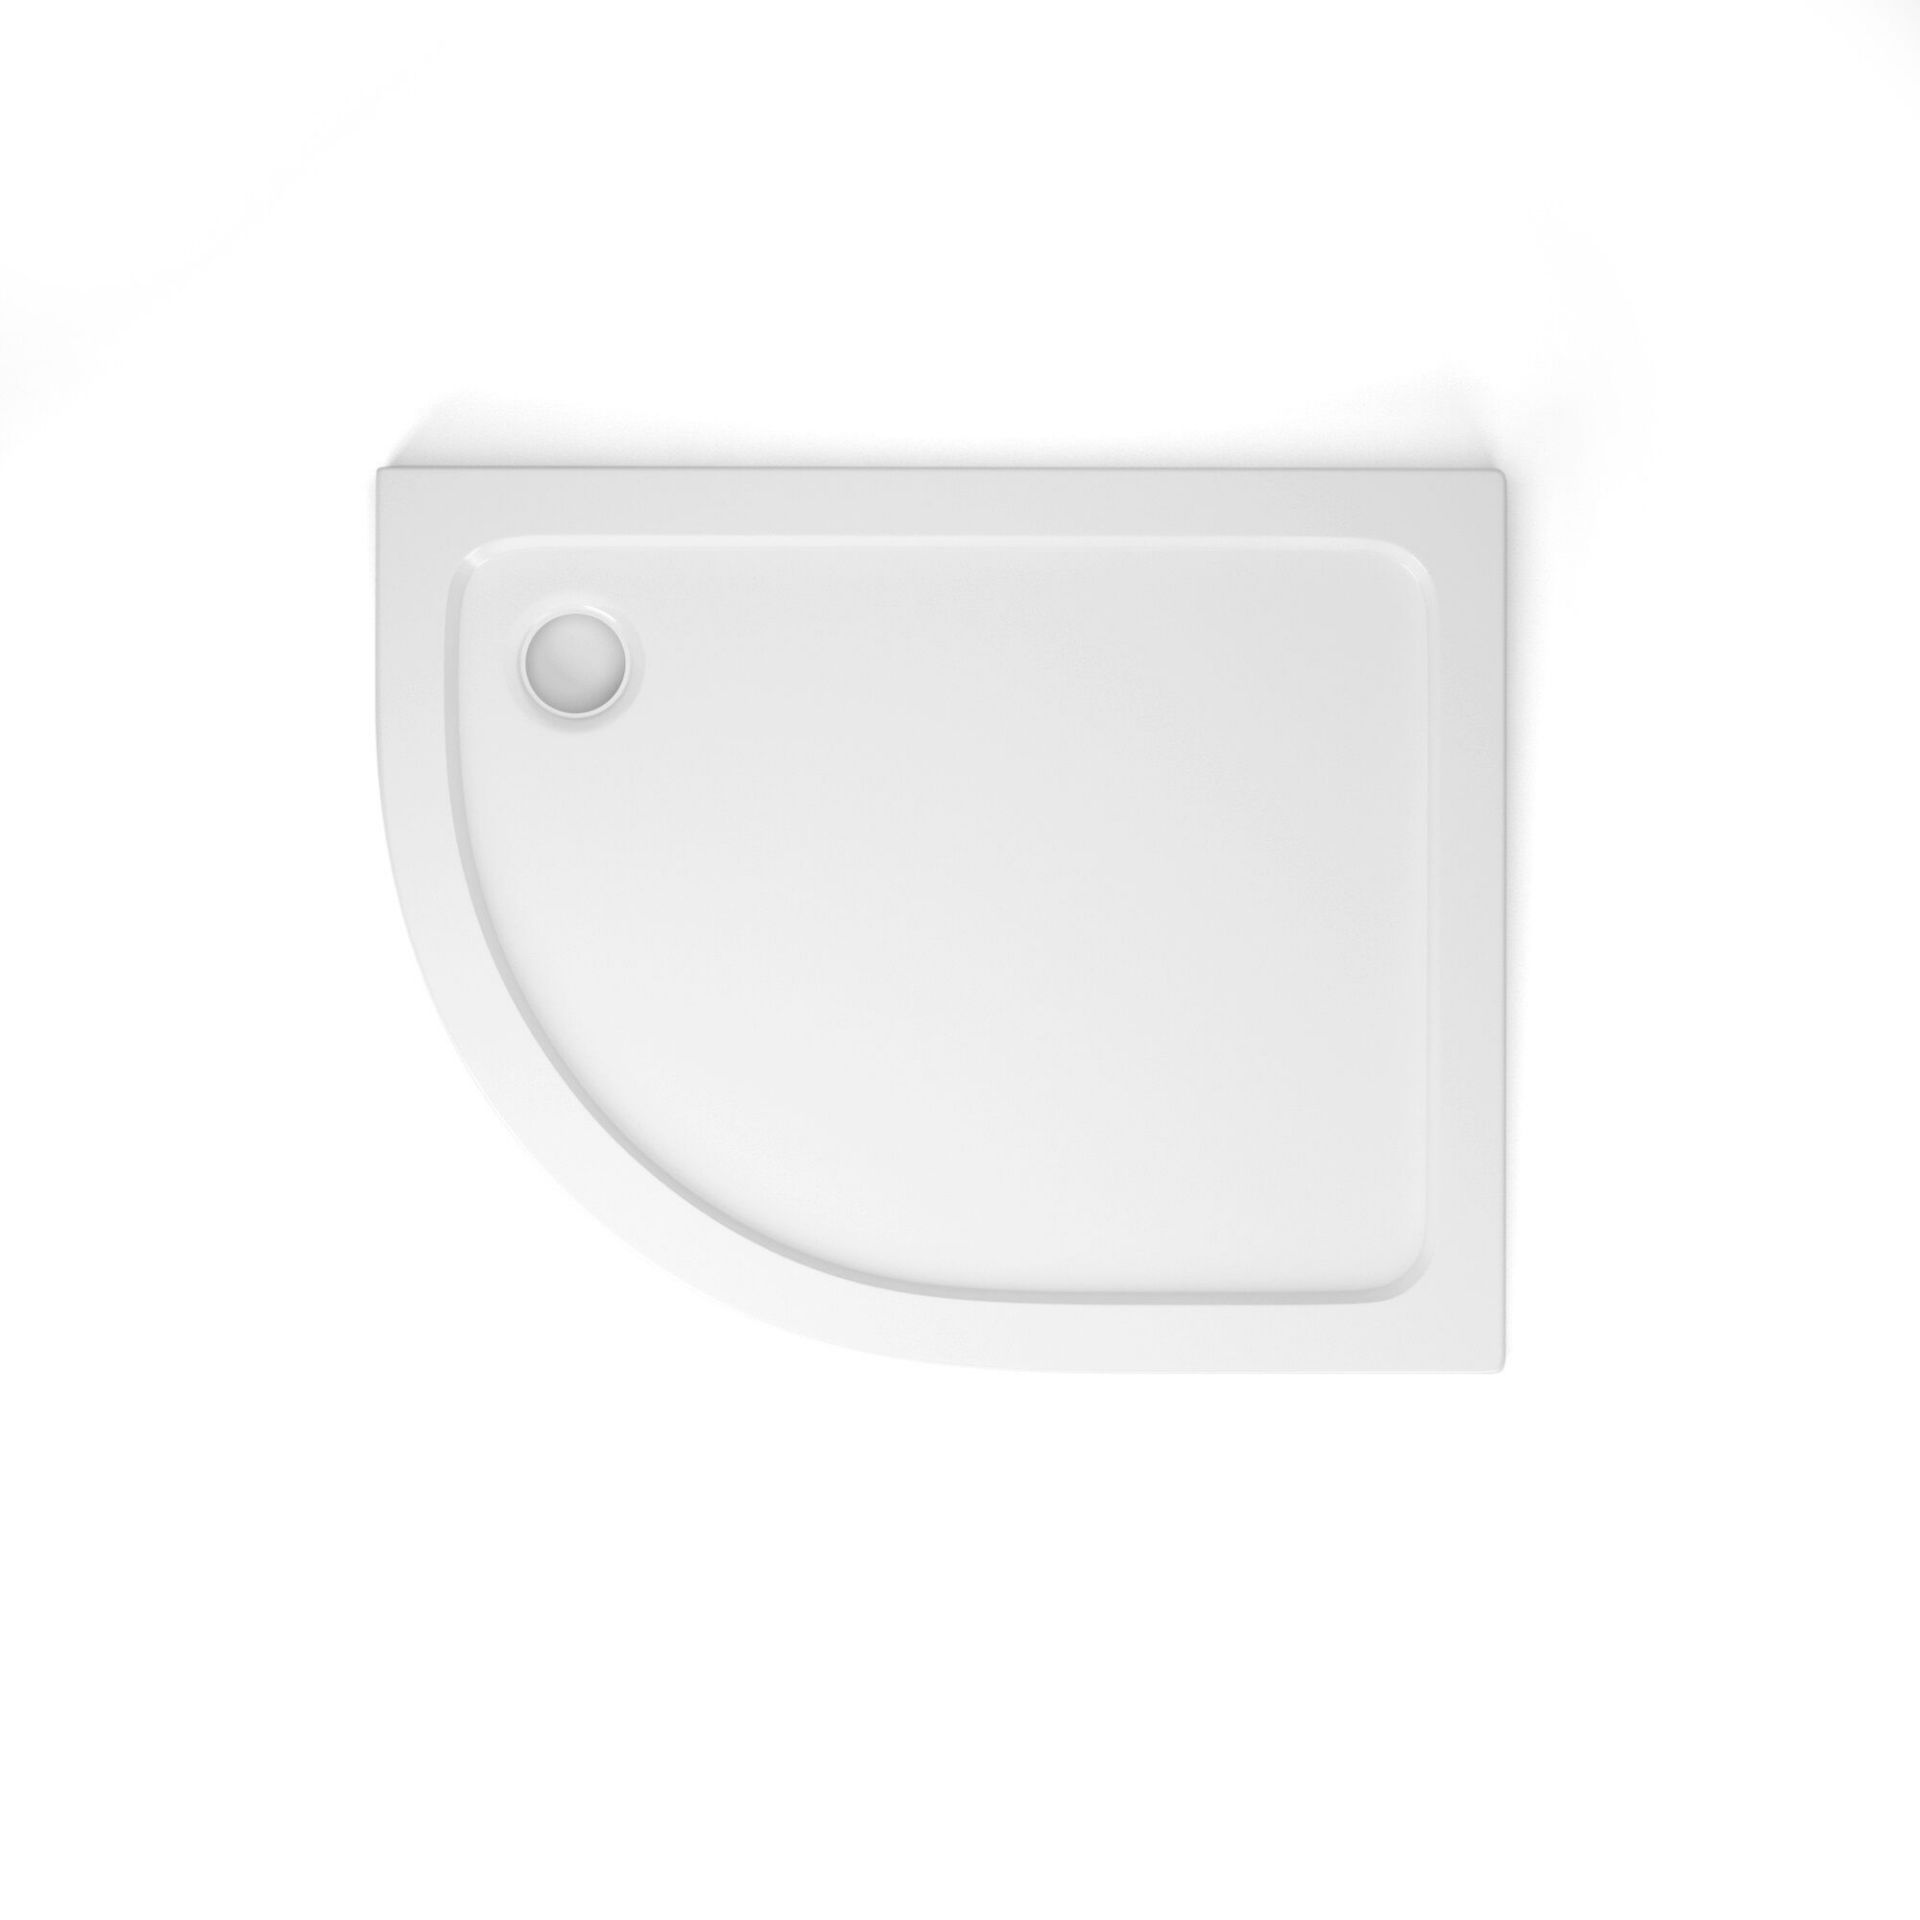 (DW24) 1000x800mm Offset Quadrant Ultra Slim Stone Shower Tray - Left. Constructed from acryli...(